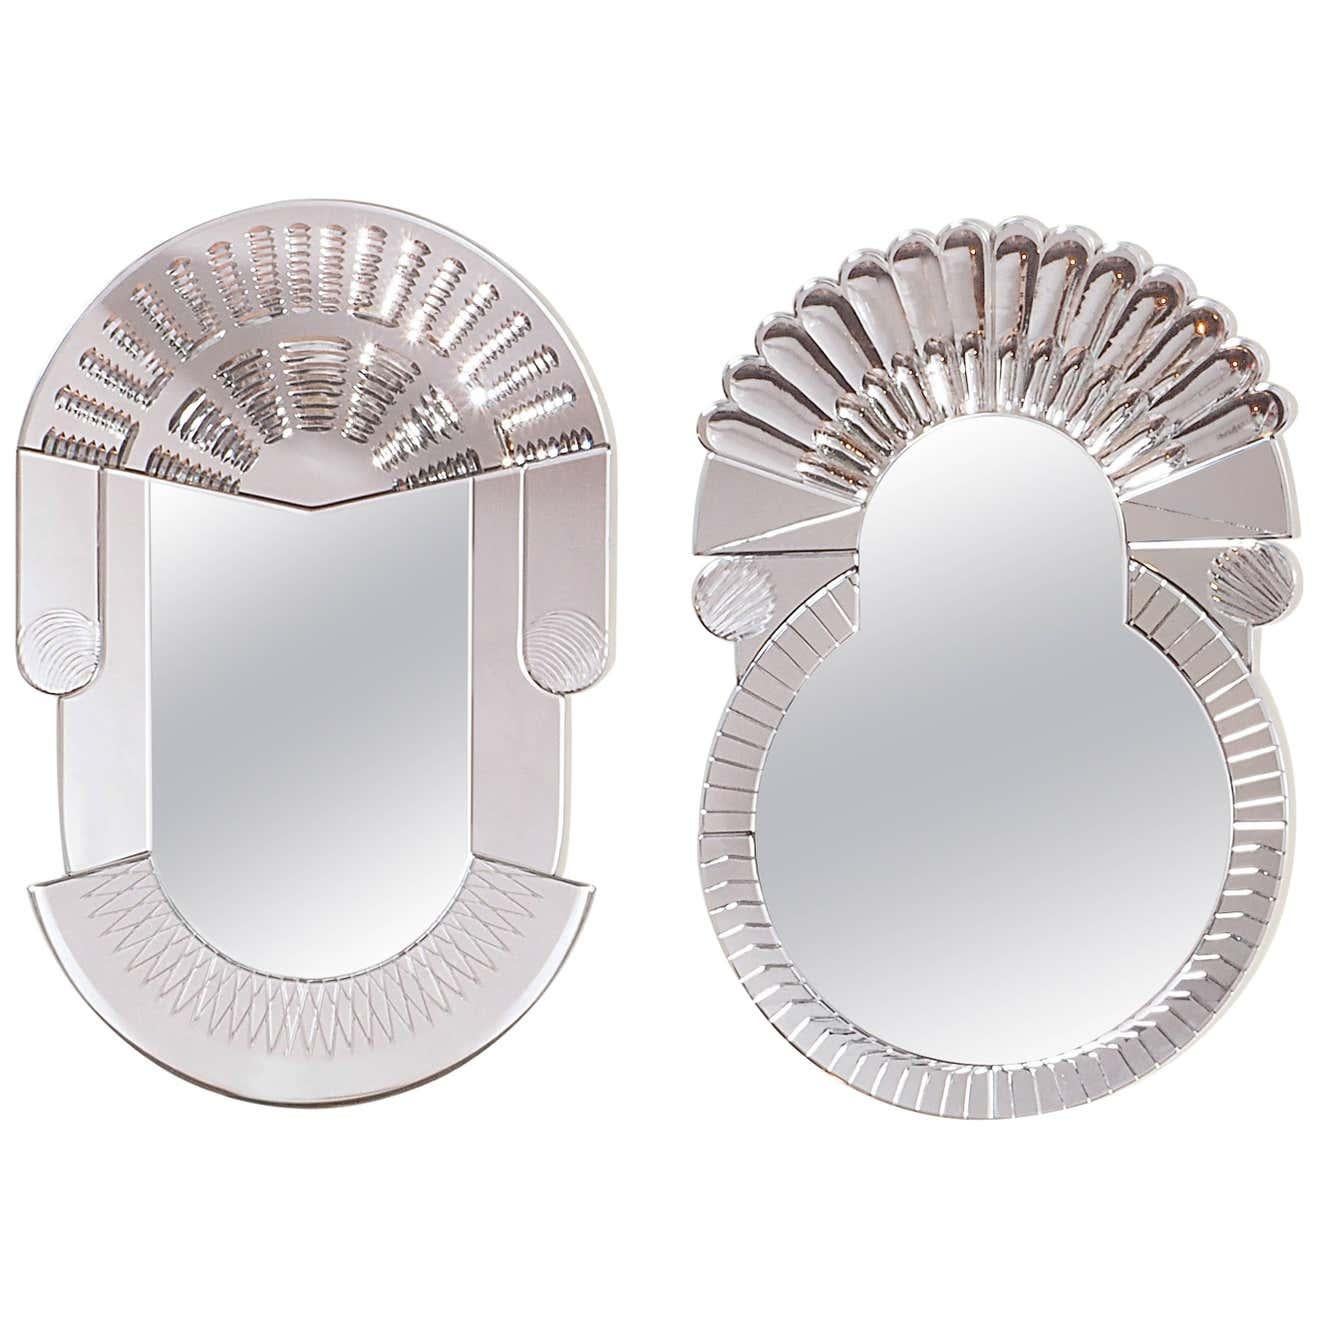 Set of 2 small scena Murano mirrors by Nikolai Kotlarczyk 
Dimensions: 
Olympic: D 1 x W 30 x H 45 cm 
Rotonda: D 1 x W 30 x H 45 cm 
Materials: silvered carved glass, golden carved polished steel. Nembro marble (base).
Also available in